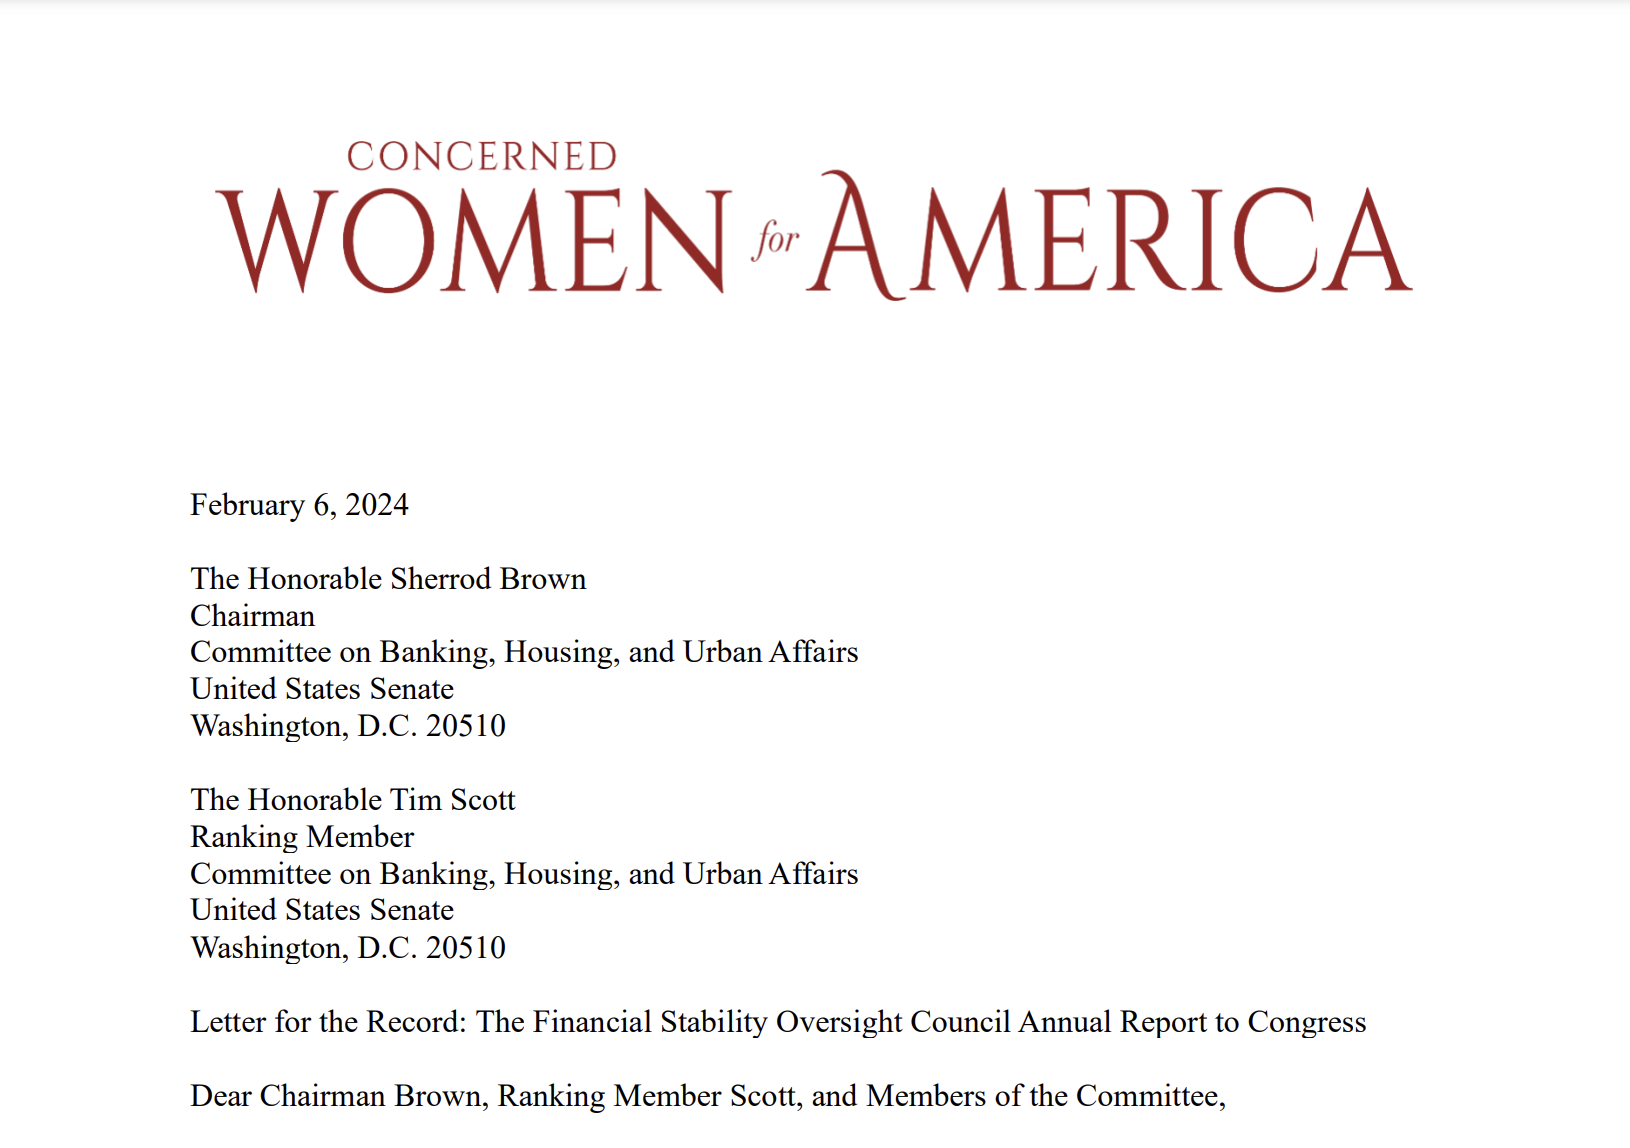 CWA Congressional Letter for the Record: “Women do not need abortion to have worth.”